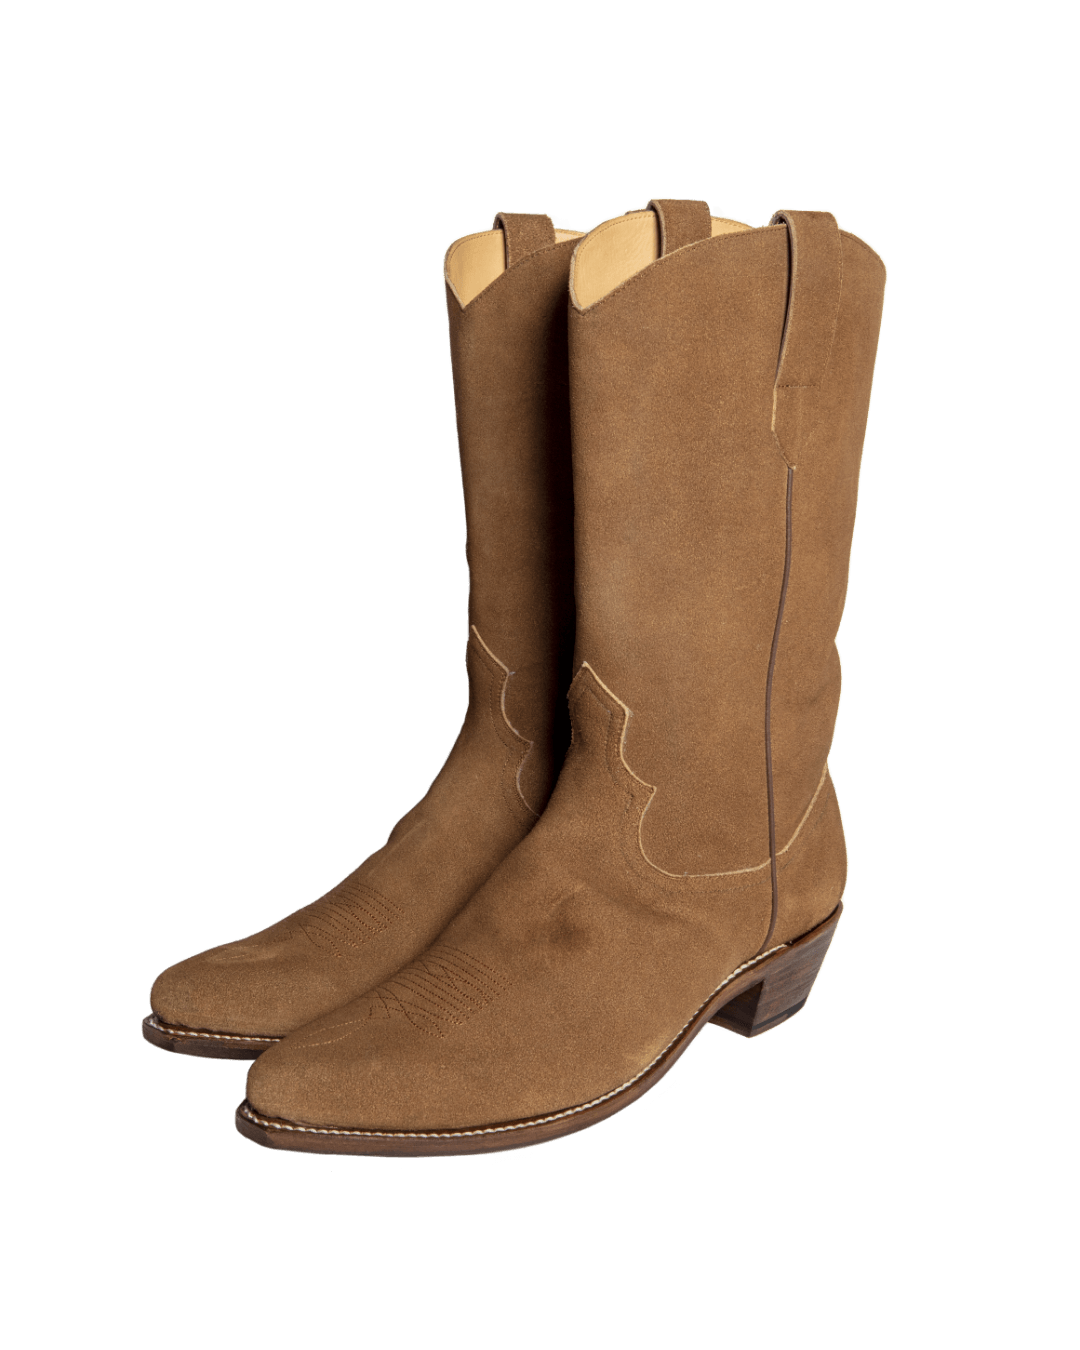 WESTERN LONG BOOTS -COW SUEDE-